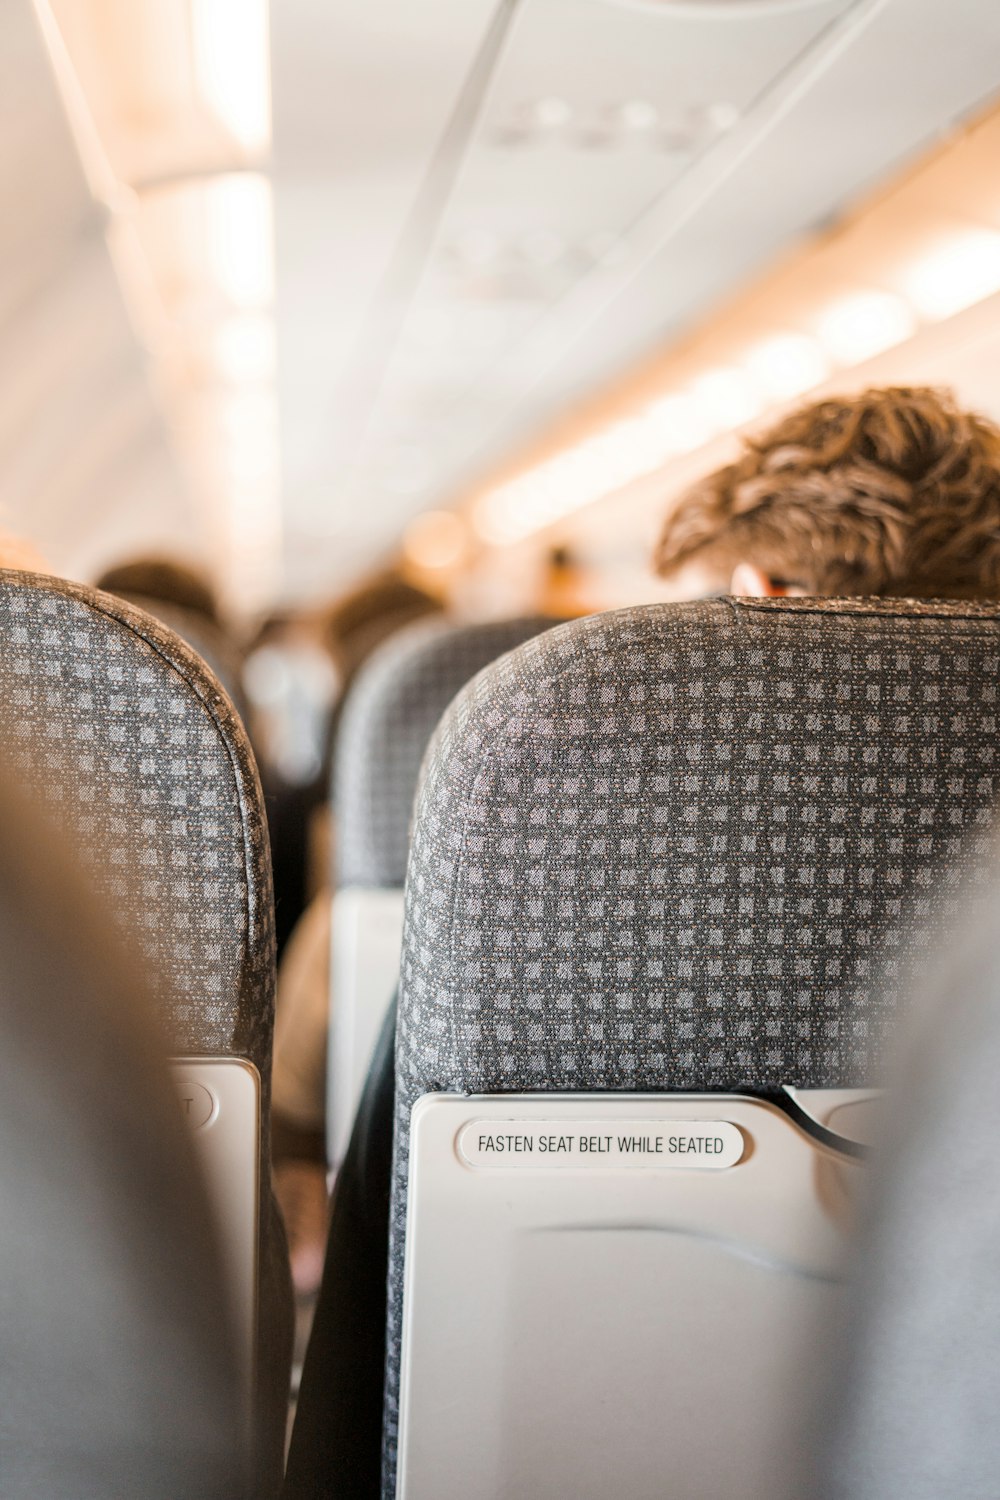 people sitting on individual chairs inside airplane